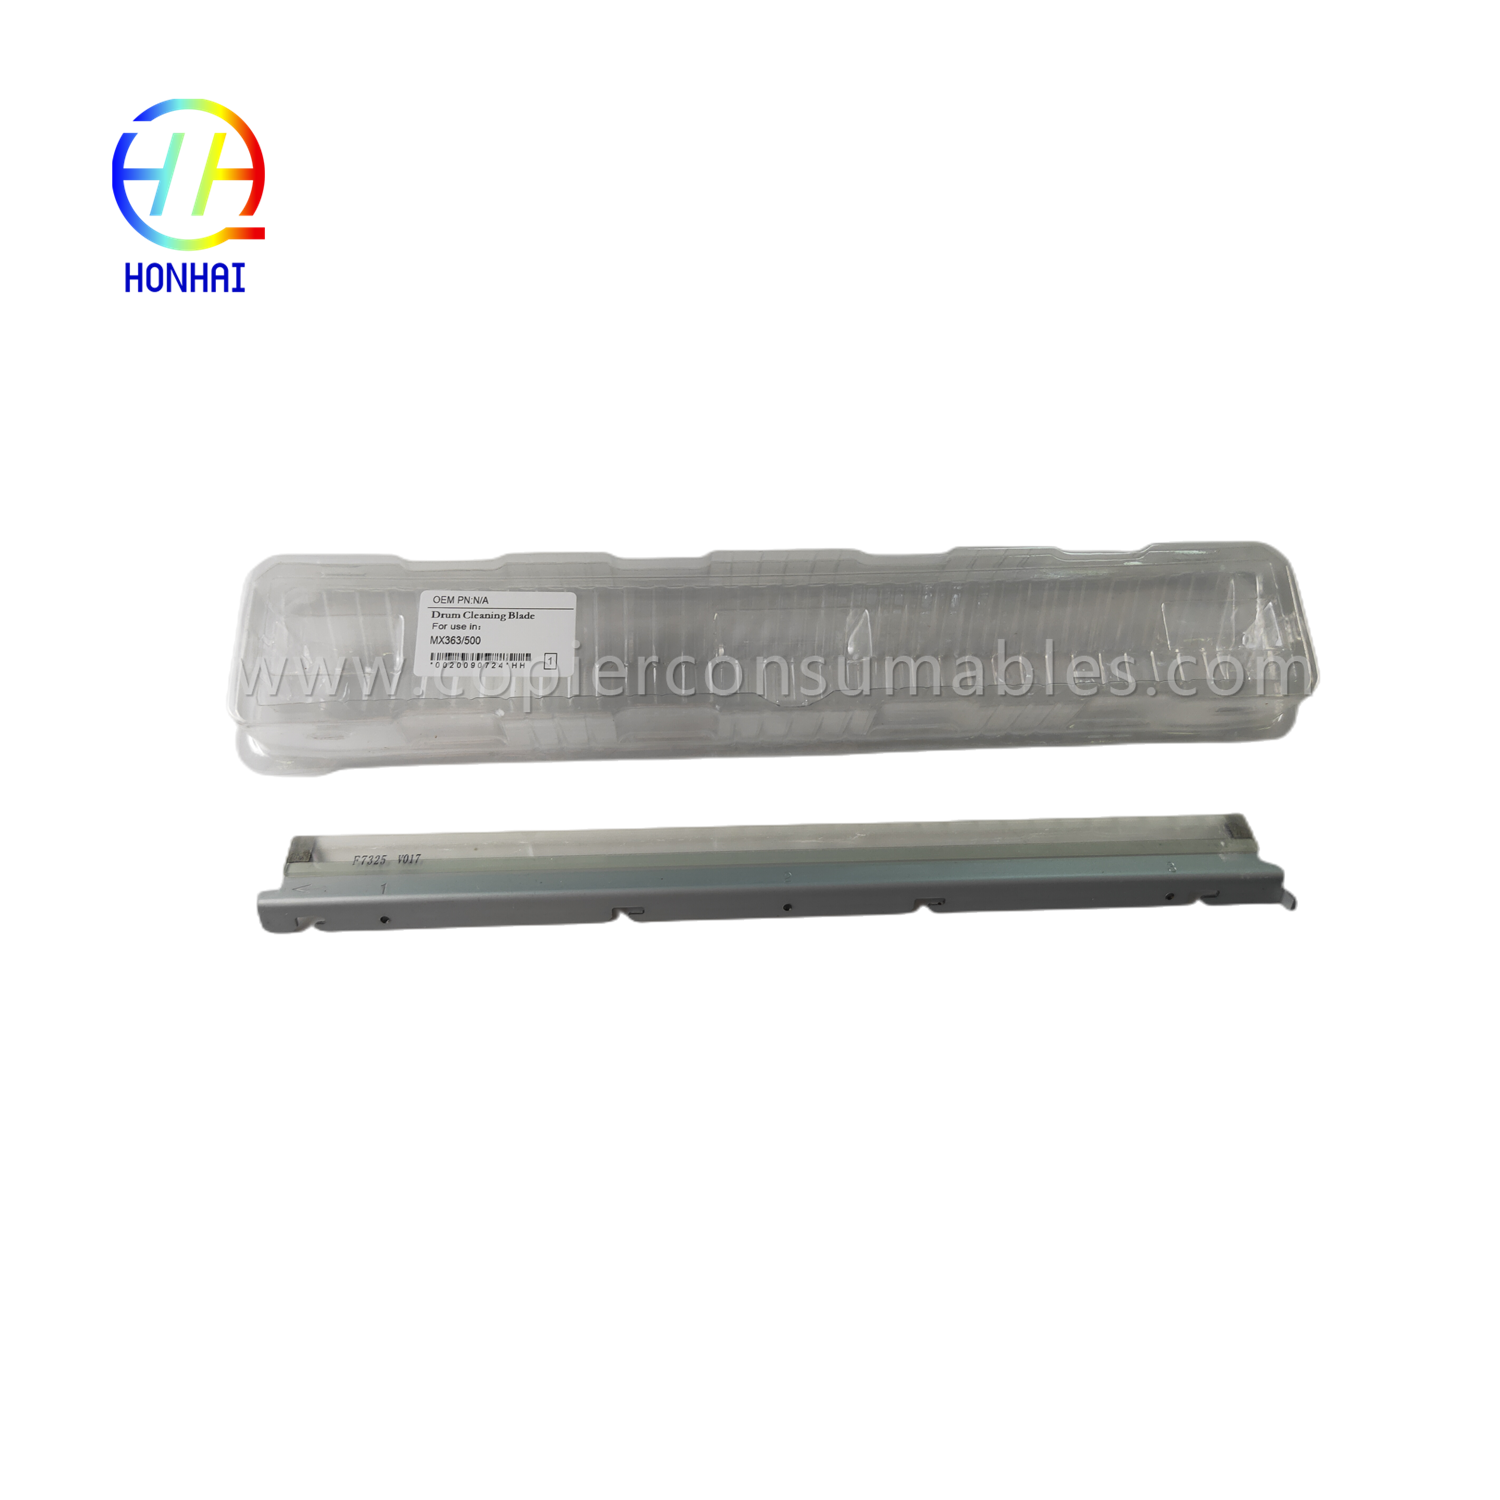 https://c585.goodao.net/drum-cleaning-blade-for-sharp-mx-m363-364-465-500-565-product/